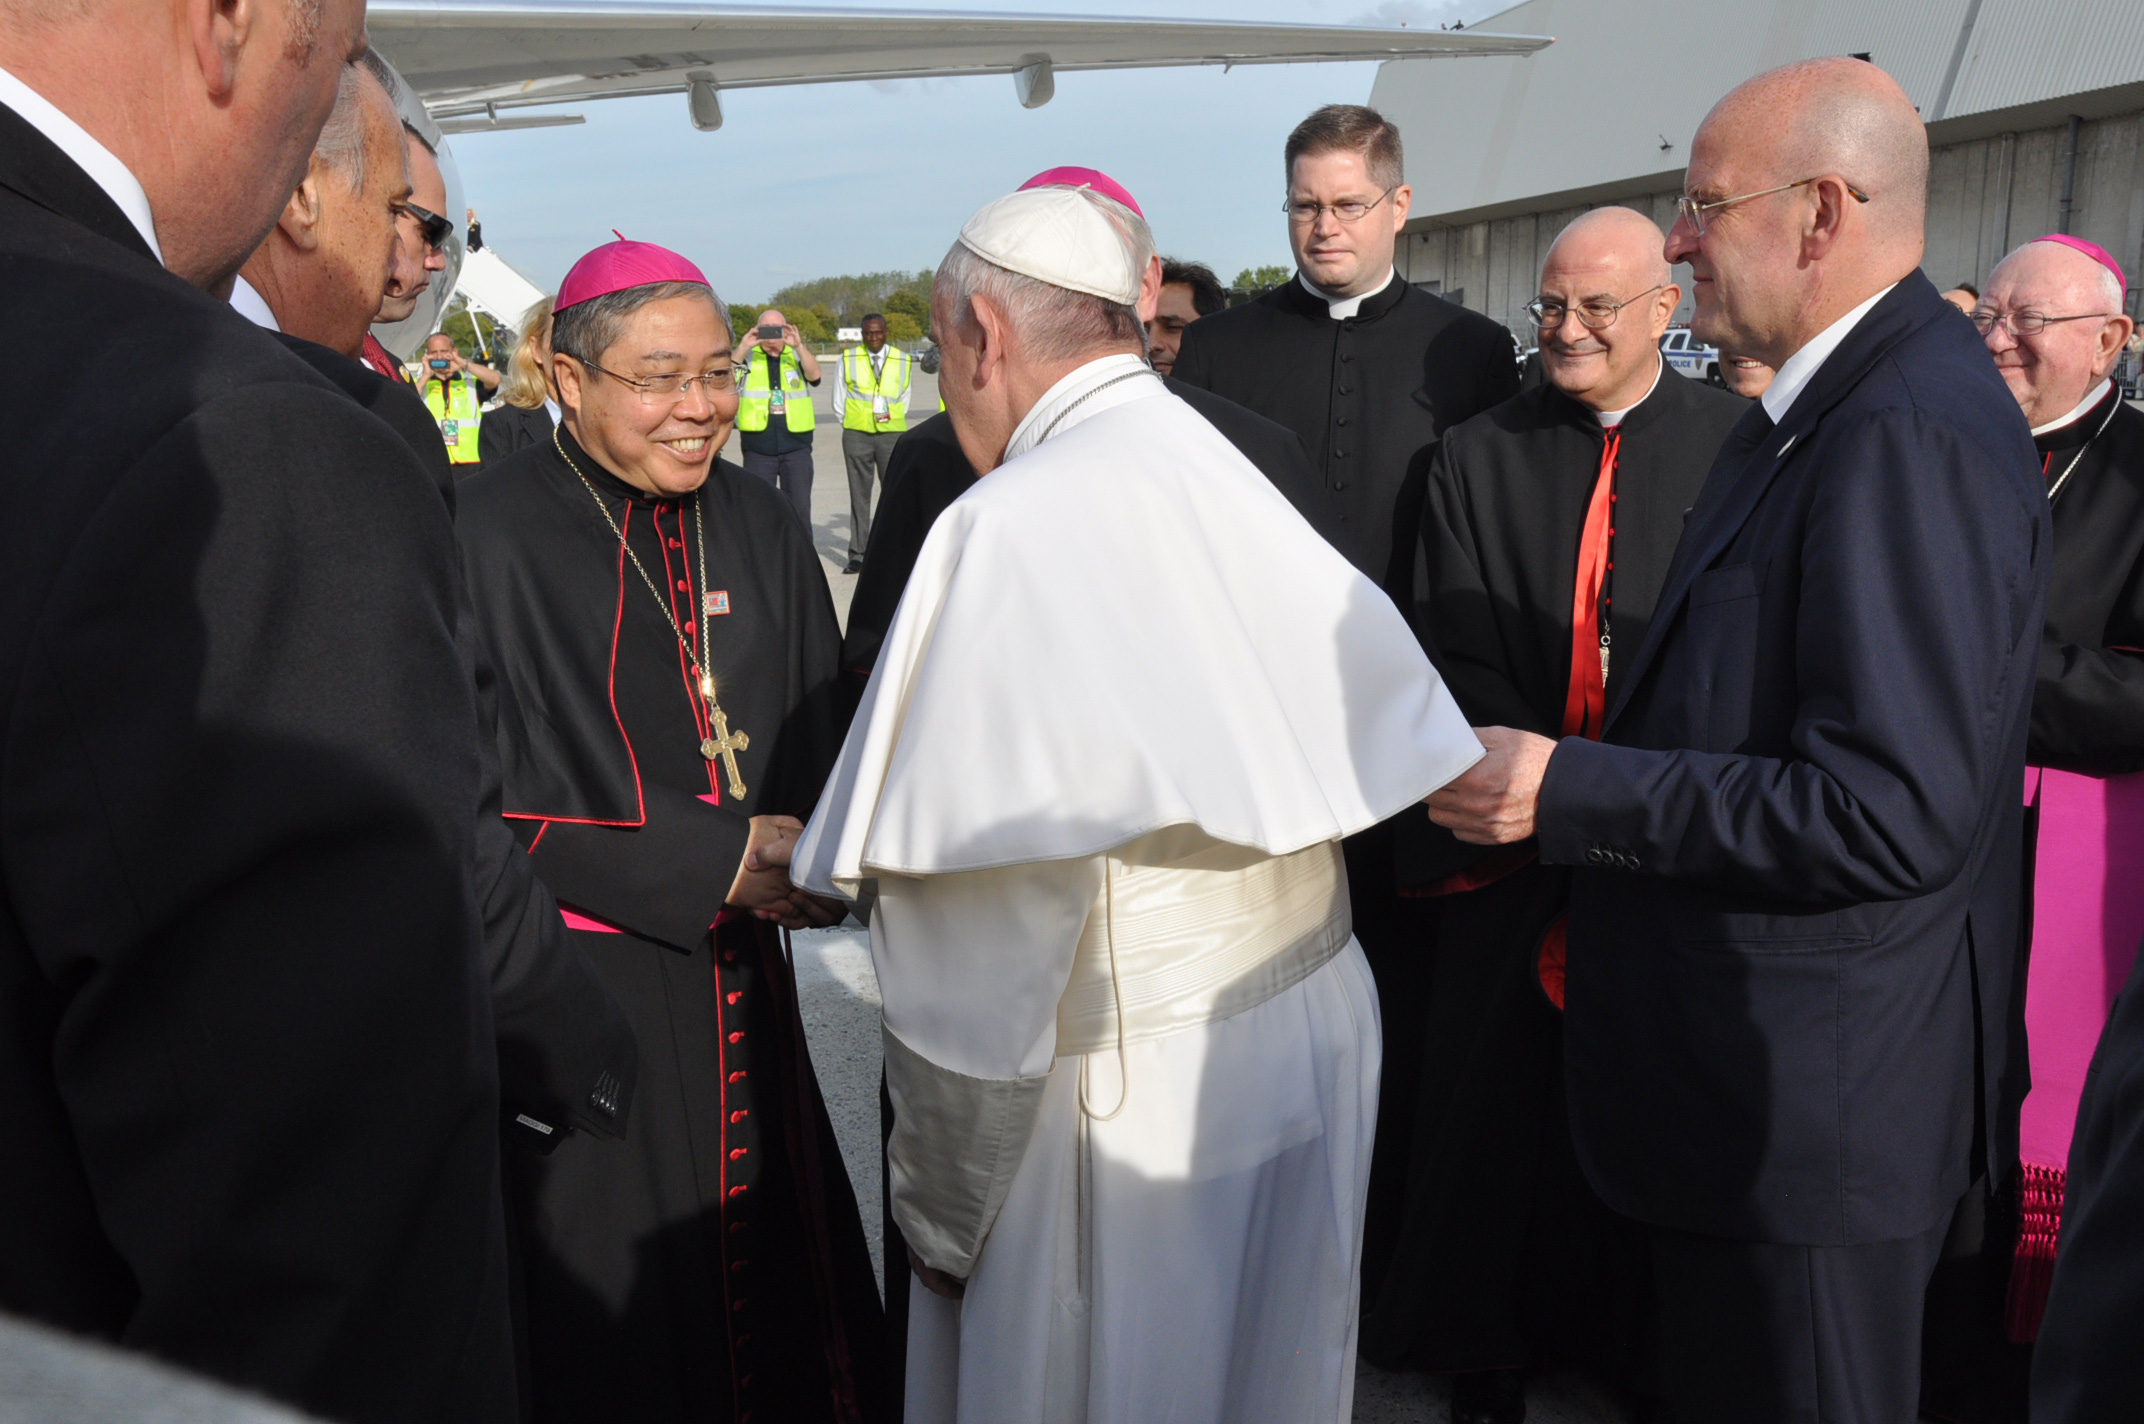 cantor azi schwartz with pope francis